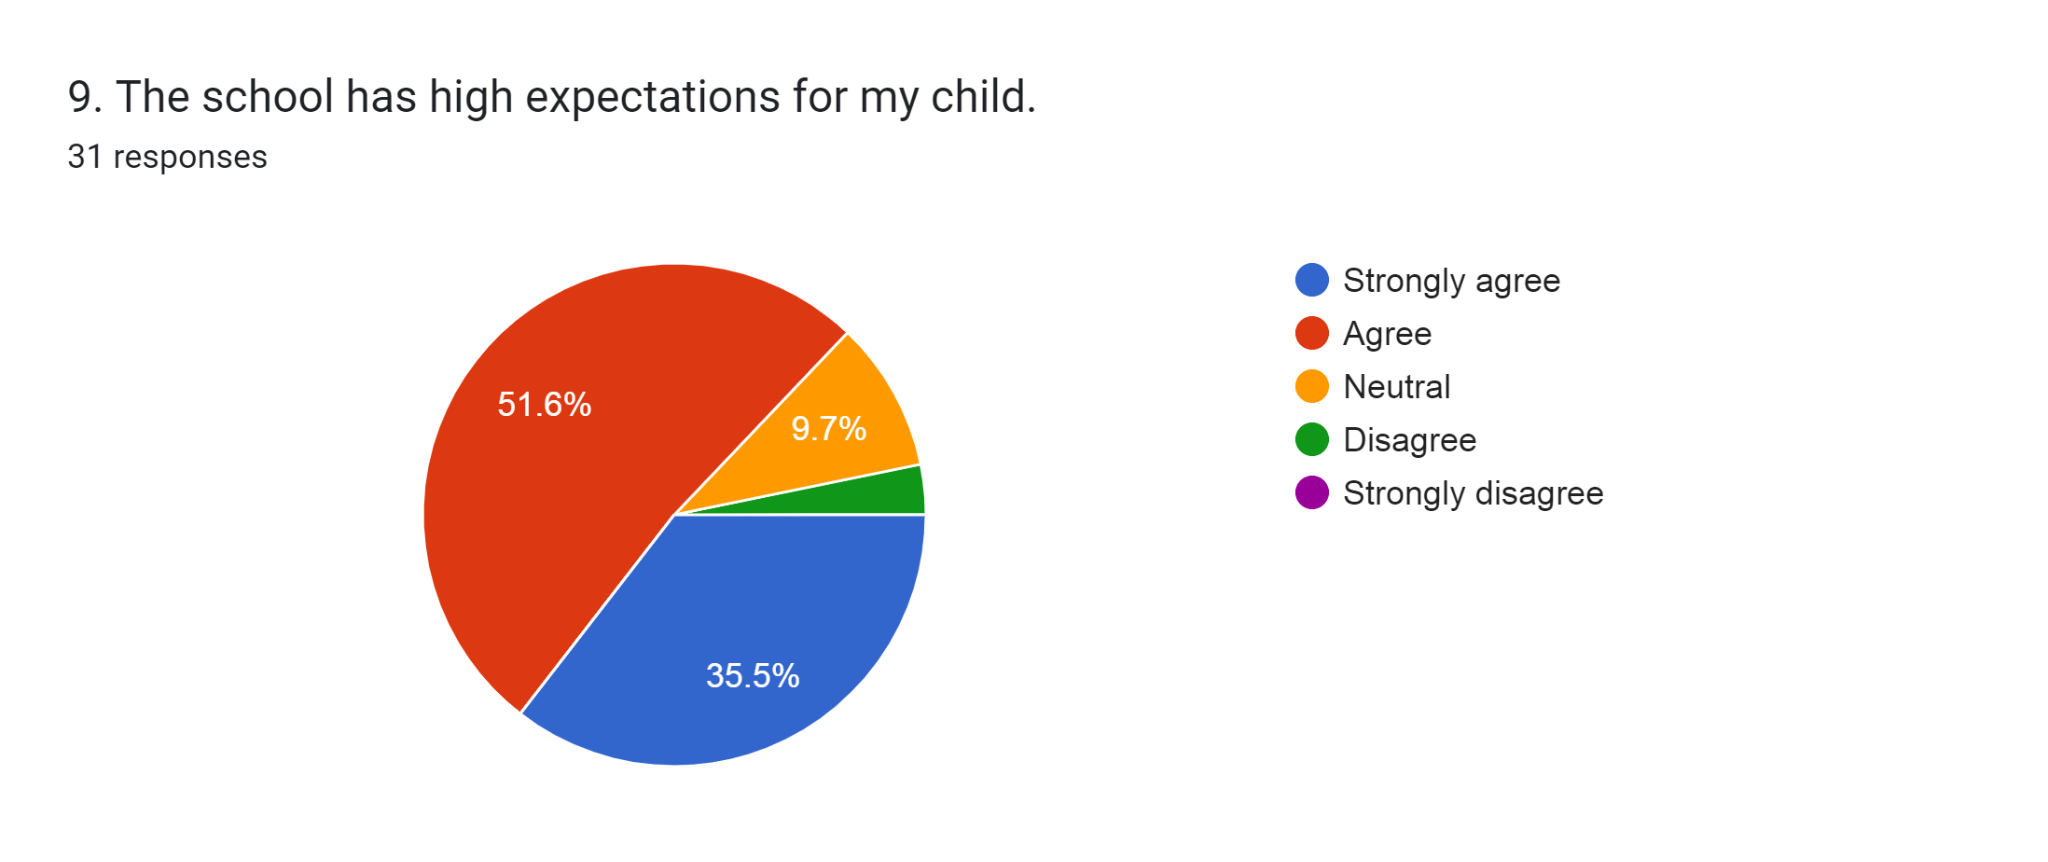 Forms response chart. Question title: 9. The school has high expectations for my child.. Number of responses: 31 responses.